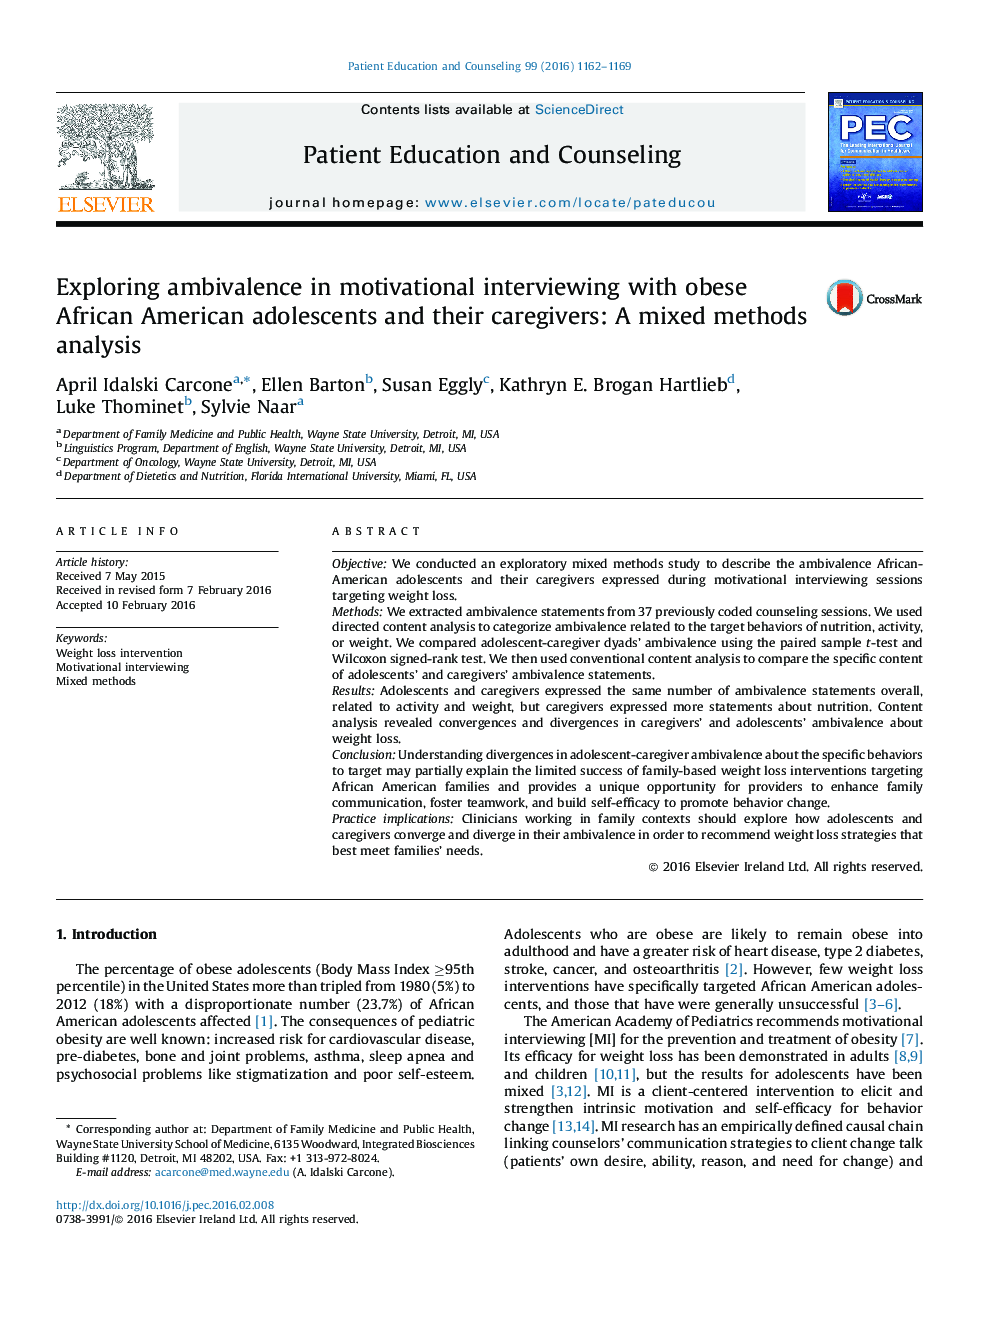 Exploring ambivalence in motivational interviewing with obese African American adolescents and their caregivers: A mixed methods analysis